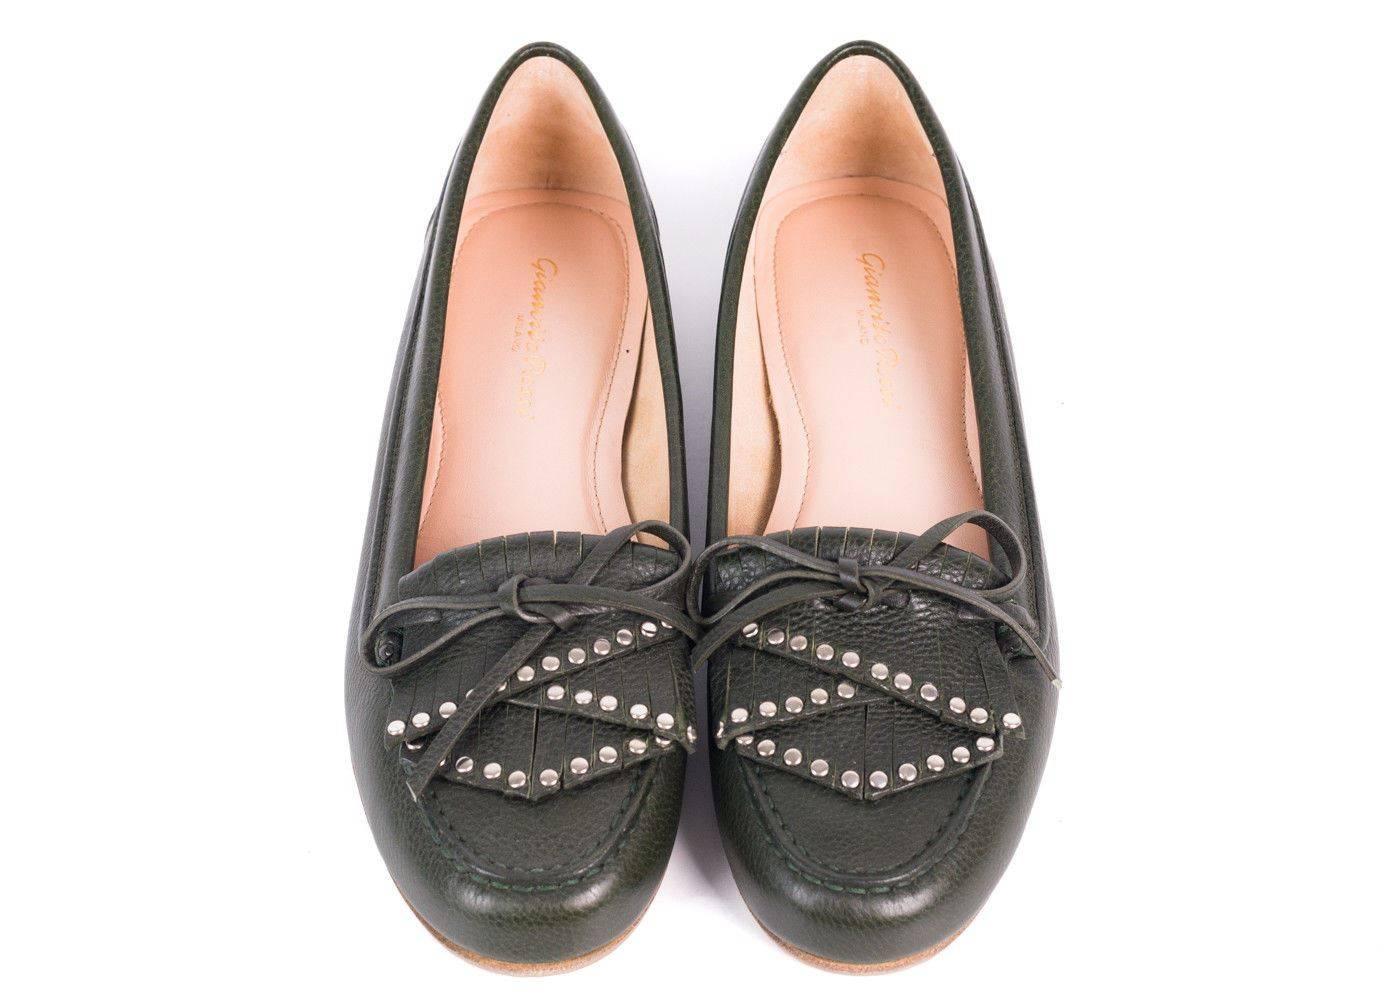 Brand New Gianvito Rossi Tassel Loafers
Original Box Included
Retails In-Store & Online for $675
Size IT37 / US7


Gianvito Rossi continues to bridge Italian glamour and high-end craftsmanship with a modern aesthetic for your everyday wear. The